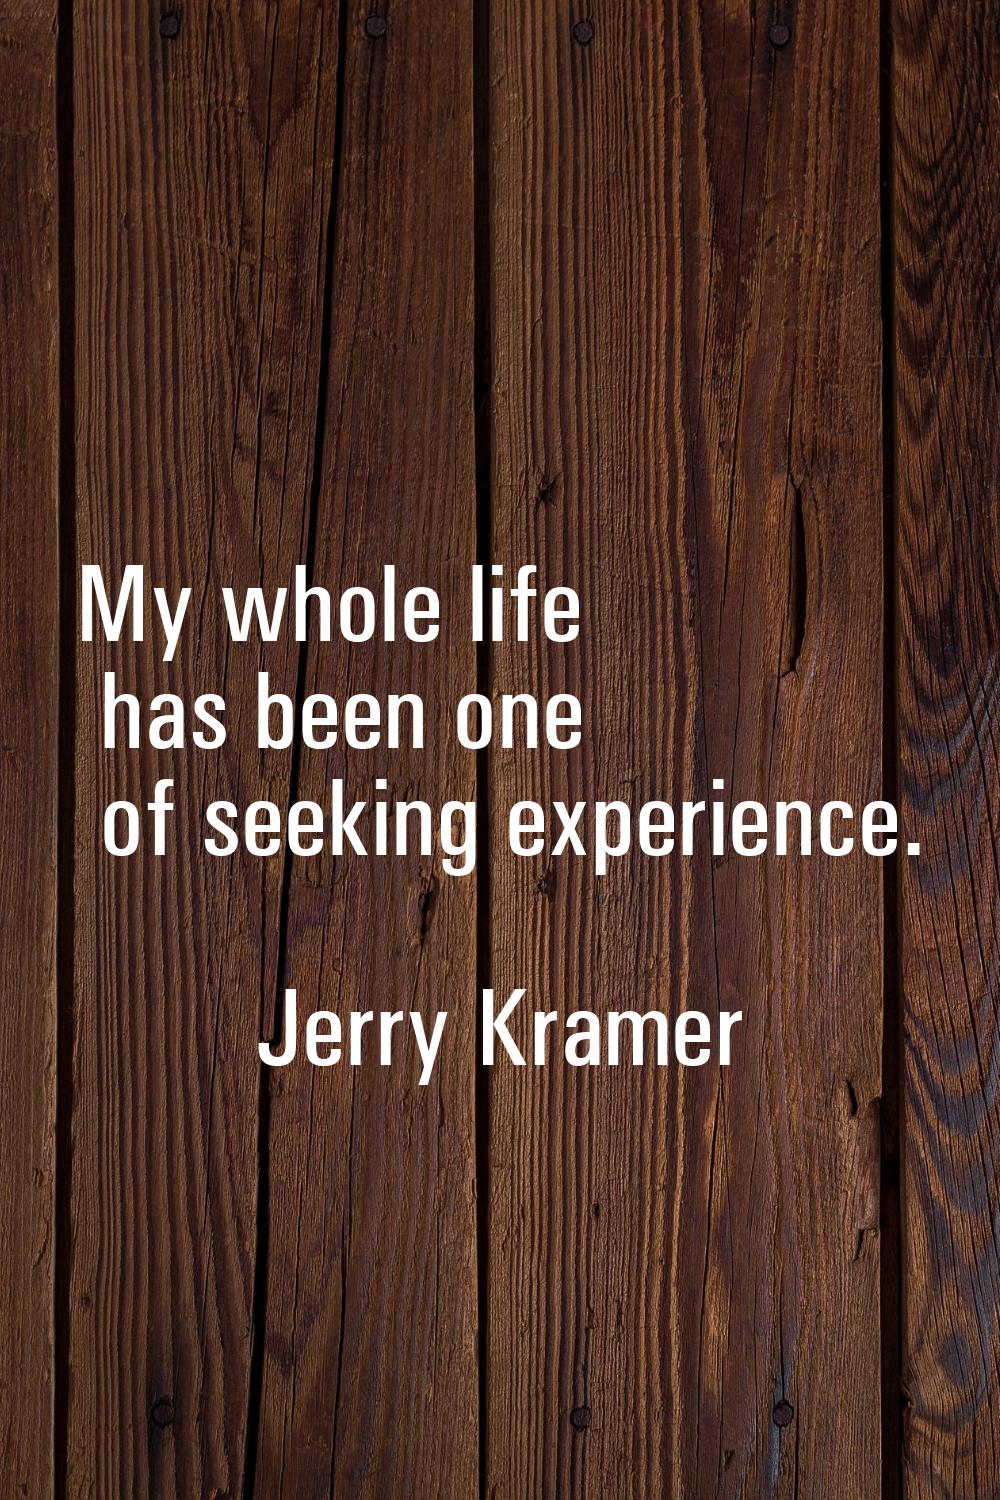 My whole life has been one of seeking experience.